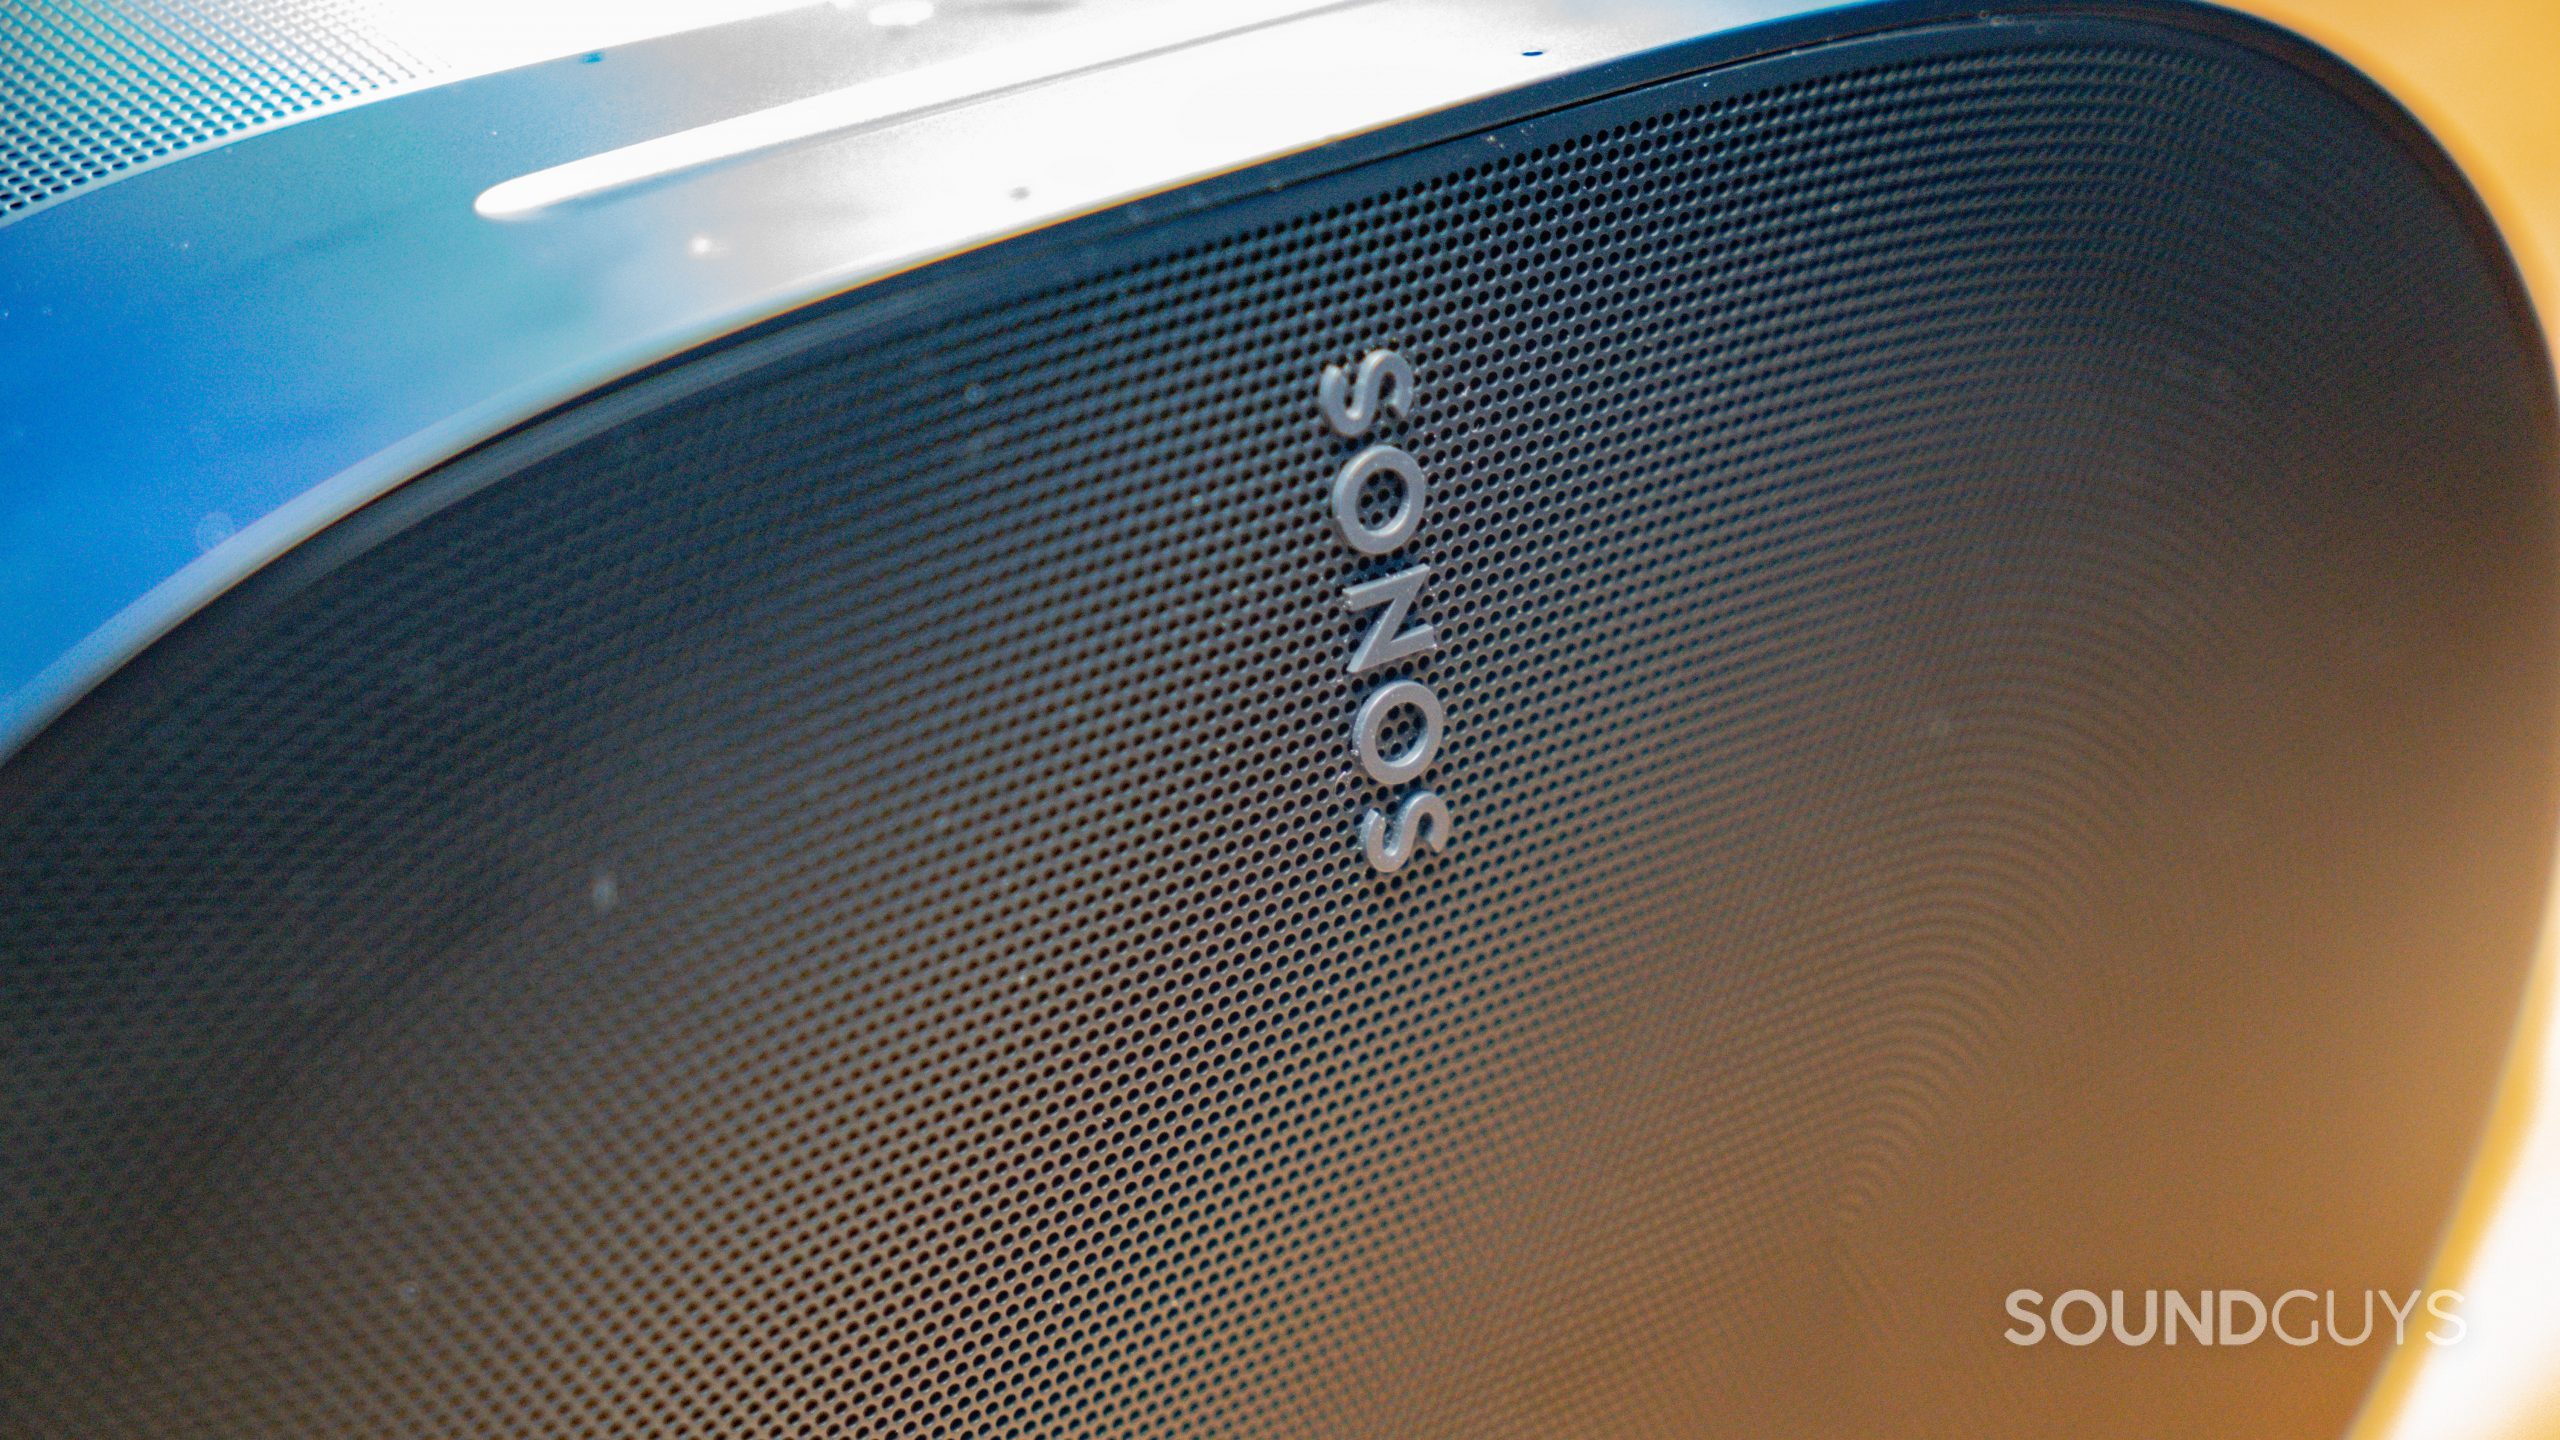 Sonos Era 300 zoomed in on the Sonos logo and front speaker grille.